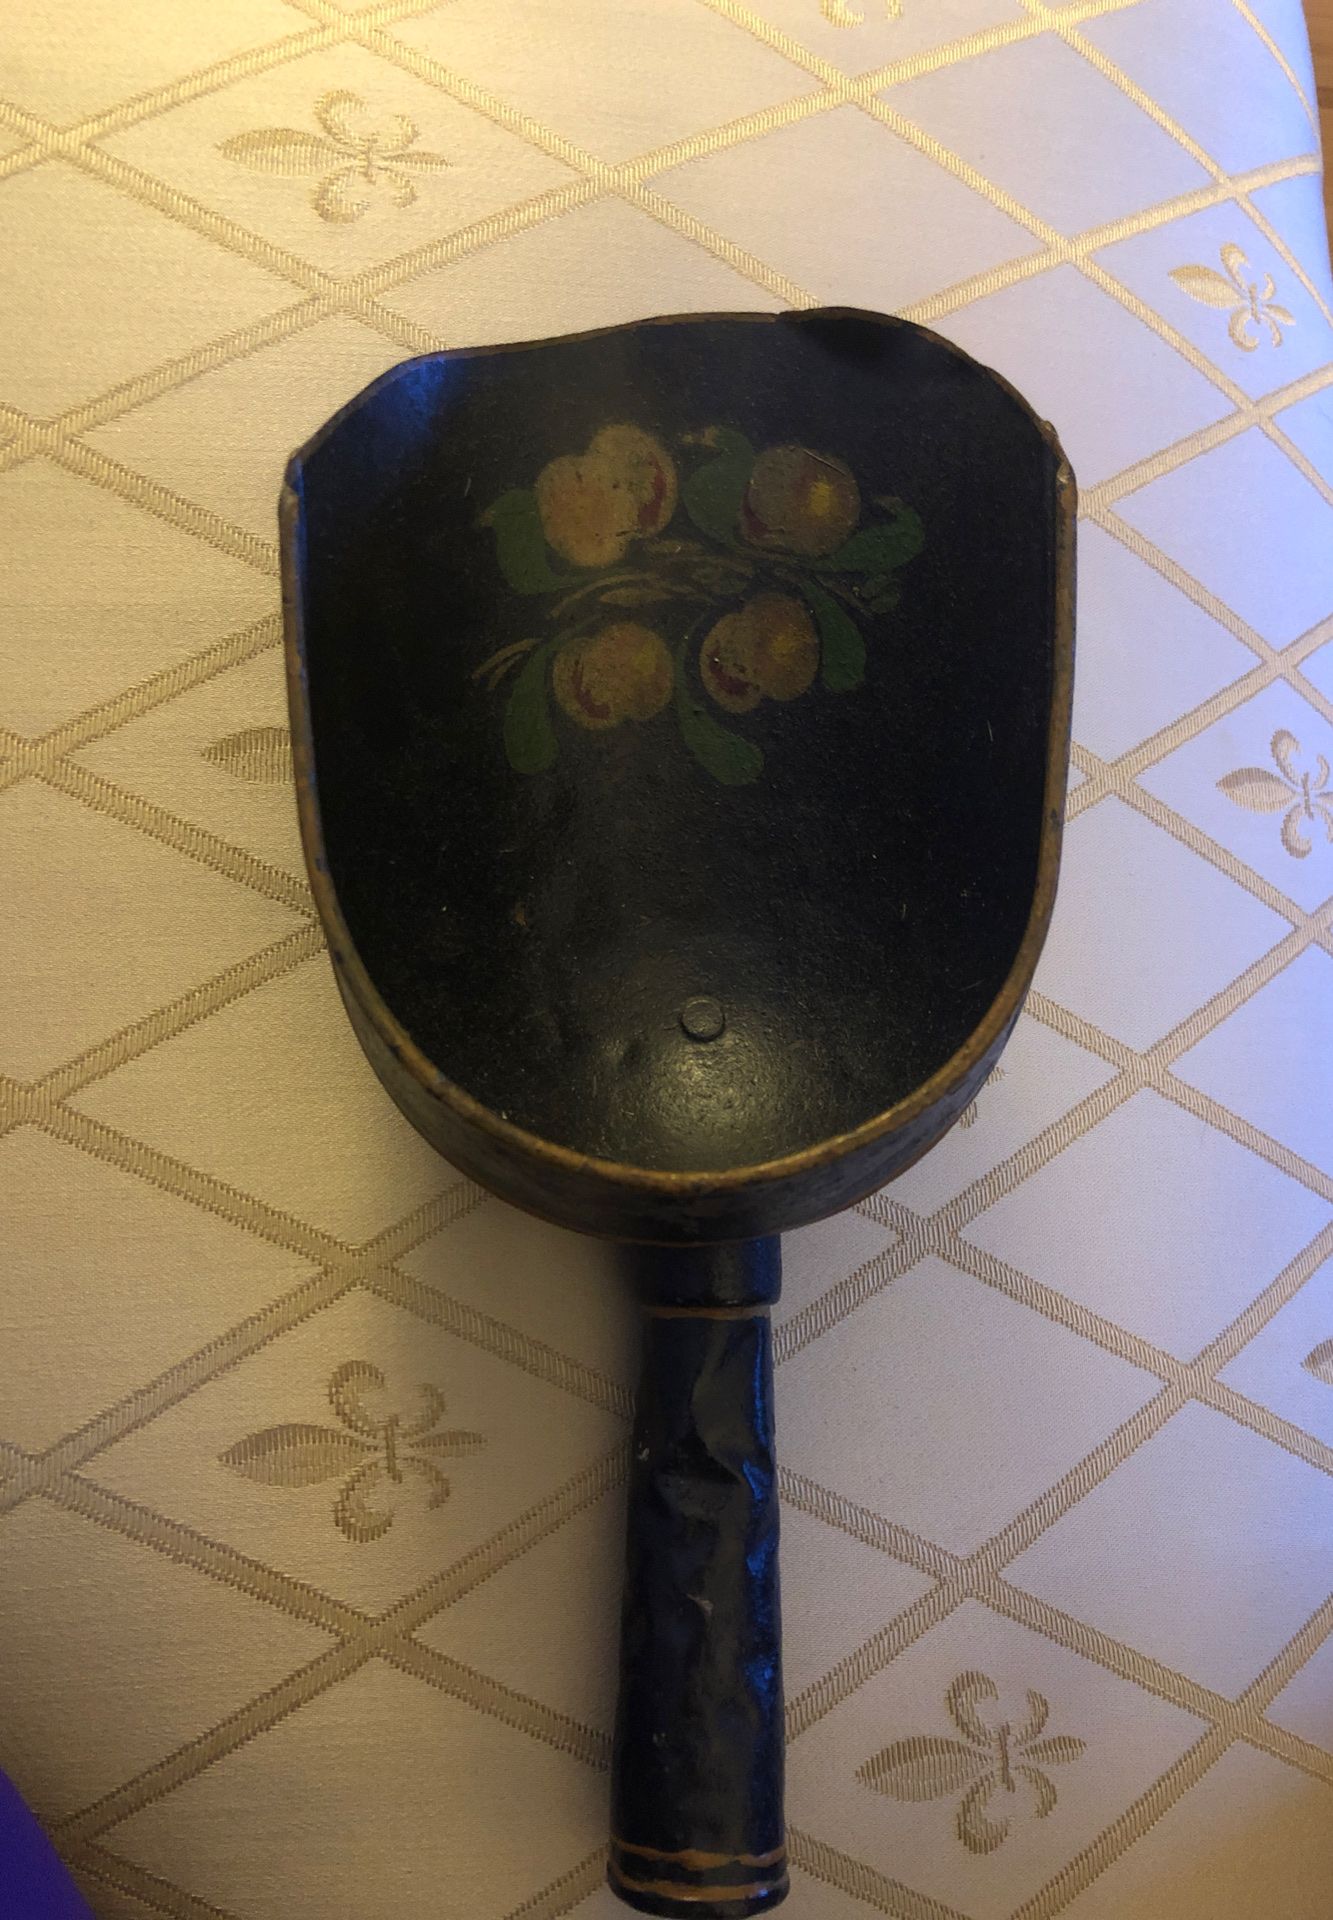 Antique coffee scooper from 1880